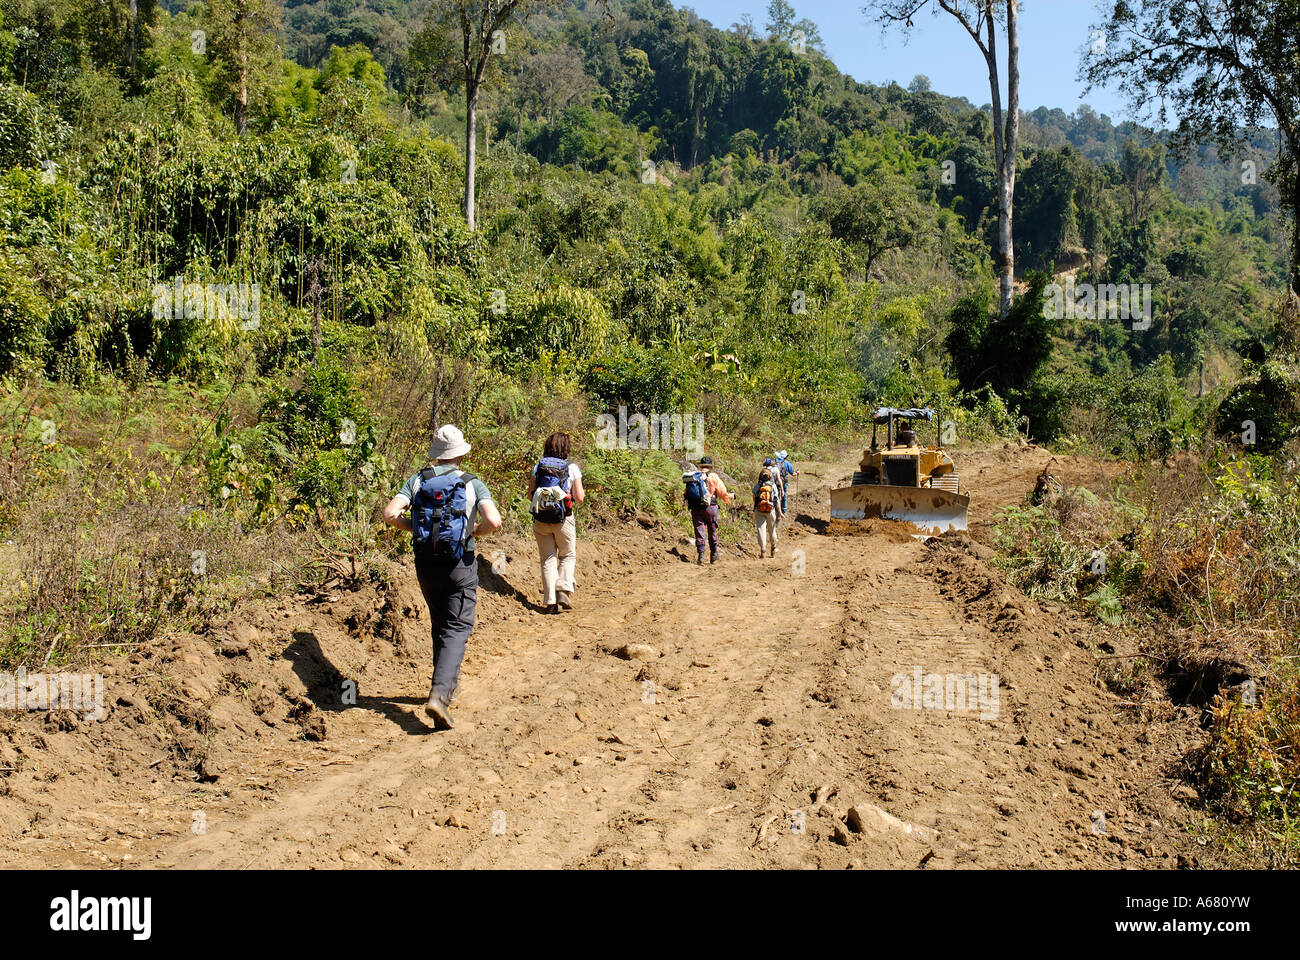 Bulldozing a new road in the rainforest, Kachin State, Myanmar Stock Photo